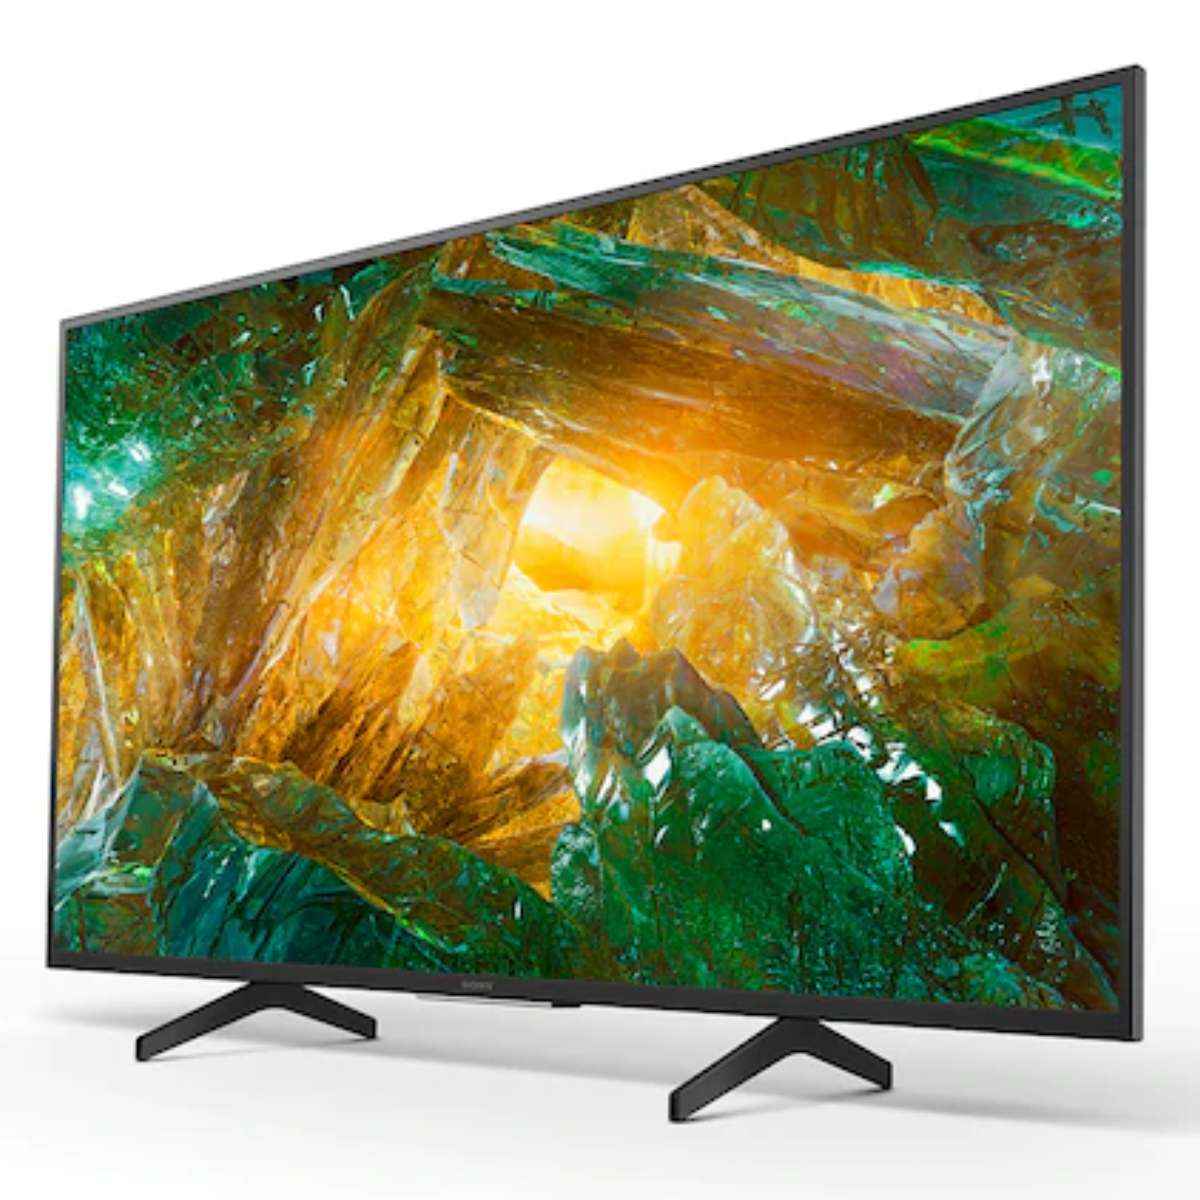 Sony 49 inch 4K ULTRA HD ANDROID SMART TV (KD-49X8000H)